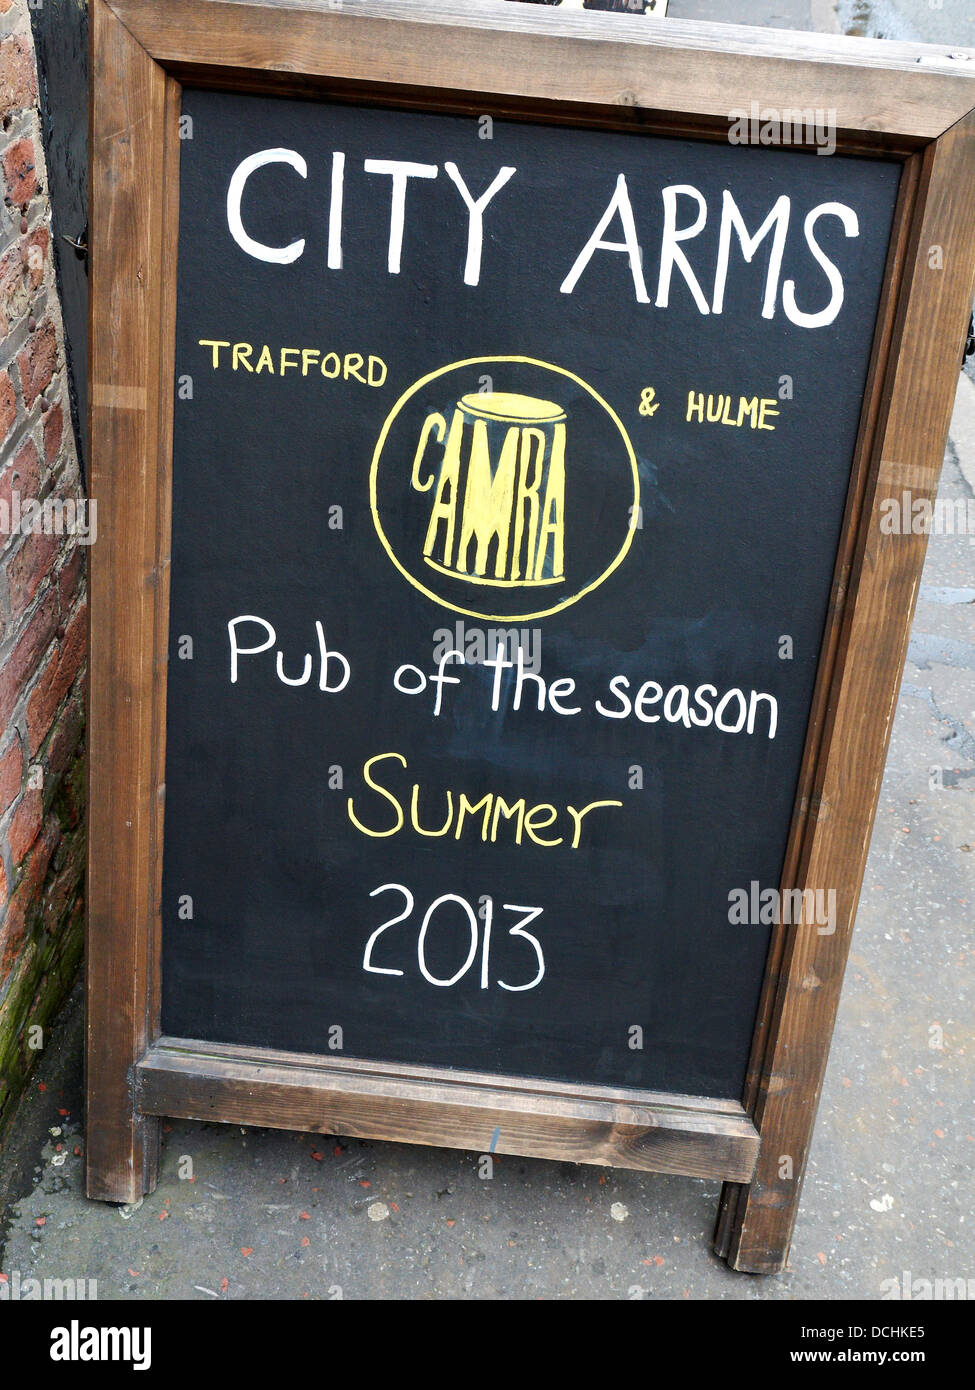 The City Arms pub of the season, summer 2013 in Manchester UK Stock Photo